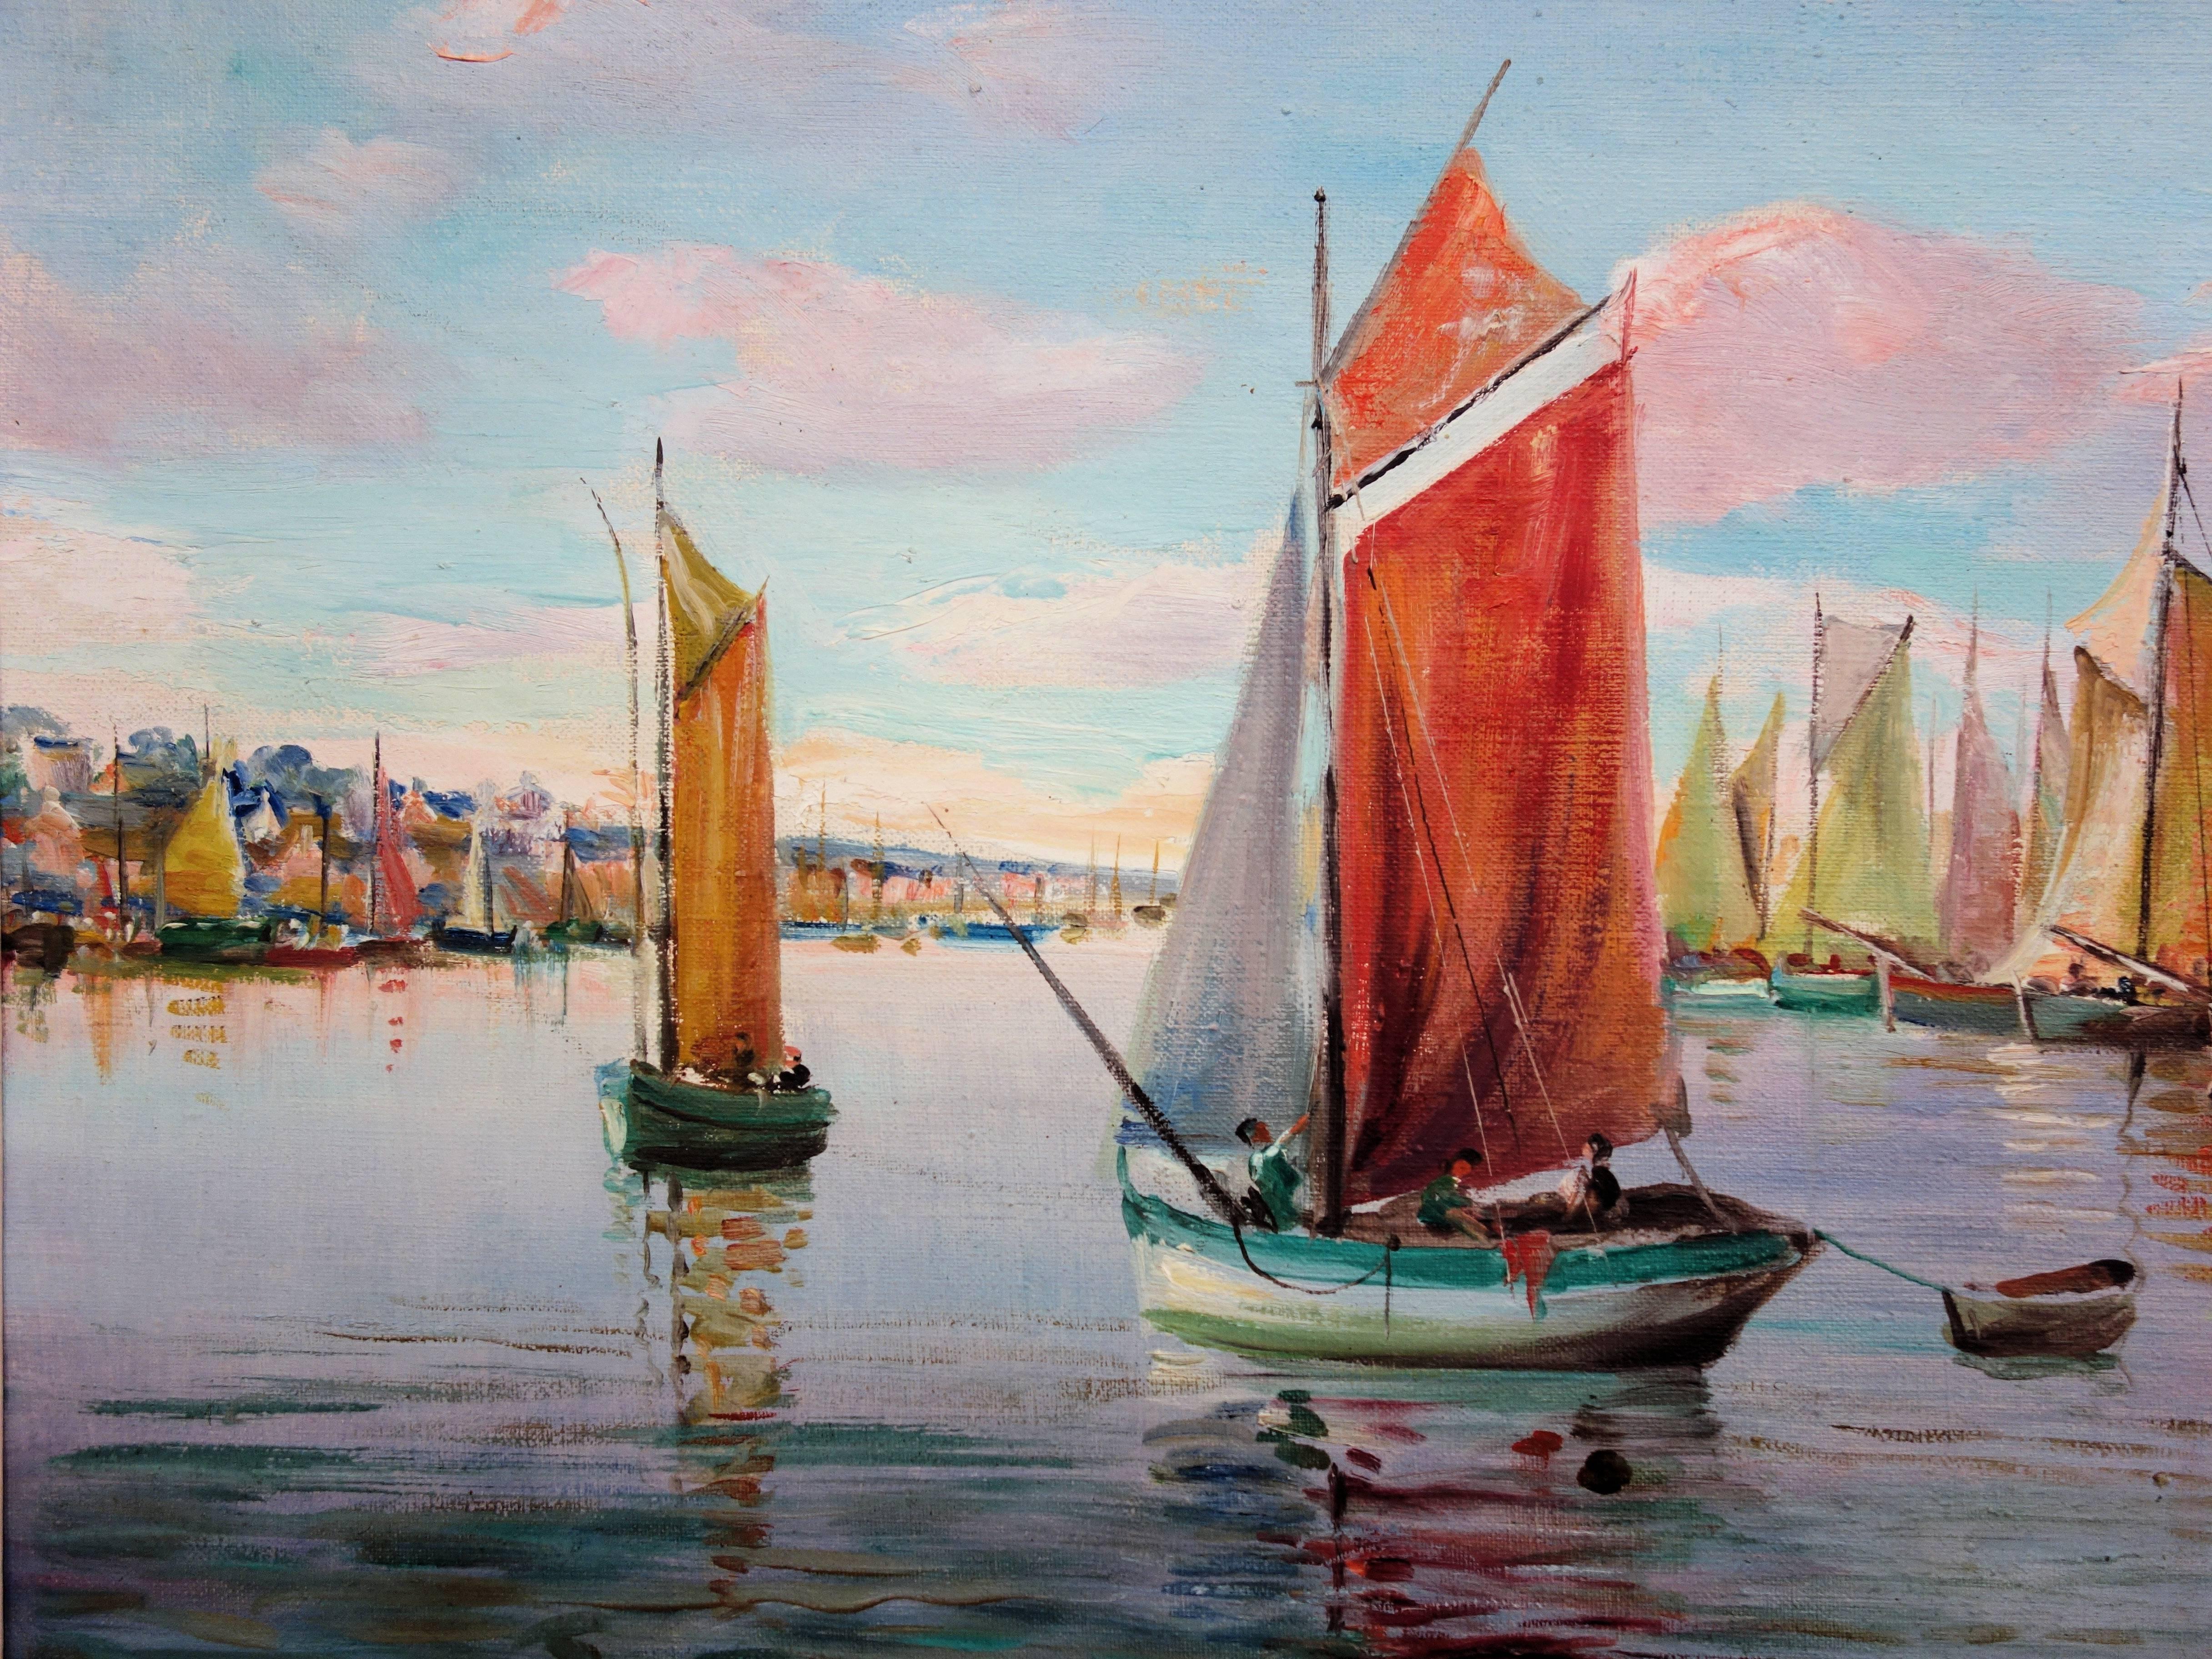 Harbour in the Early Morning - Signed oil on canvas - Framed - Modern Painting by Adrien Simoneton